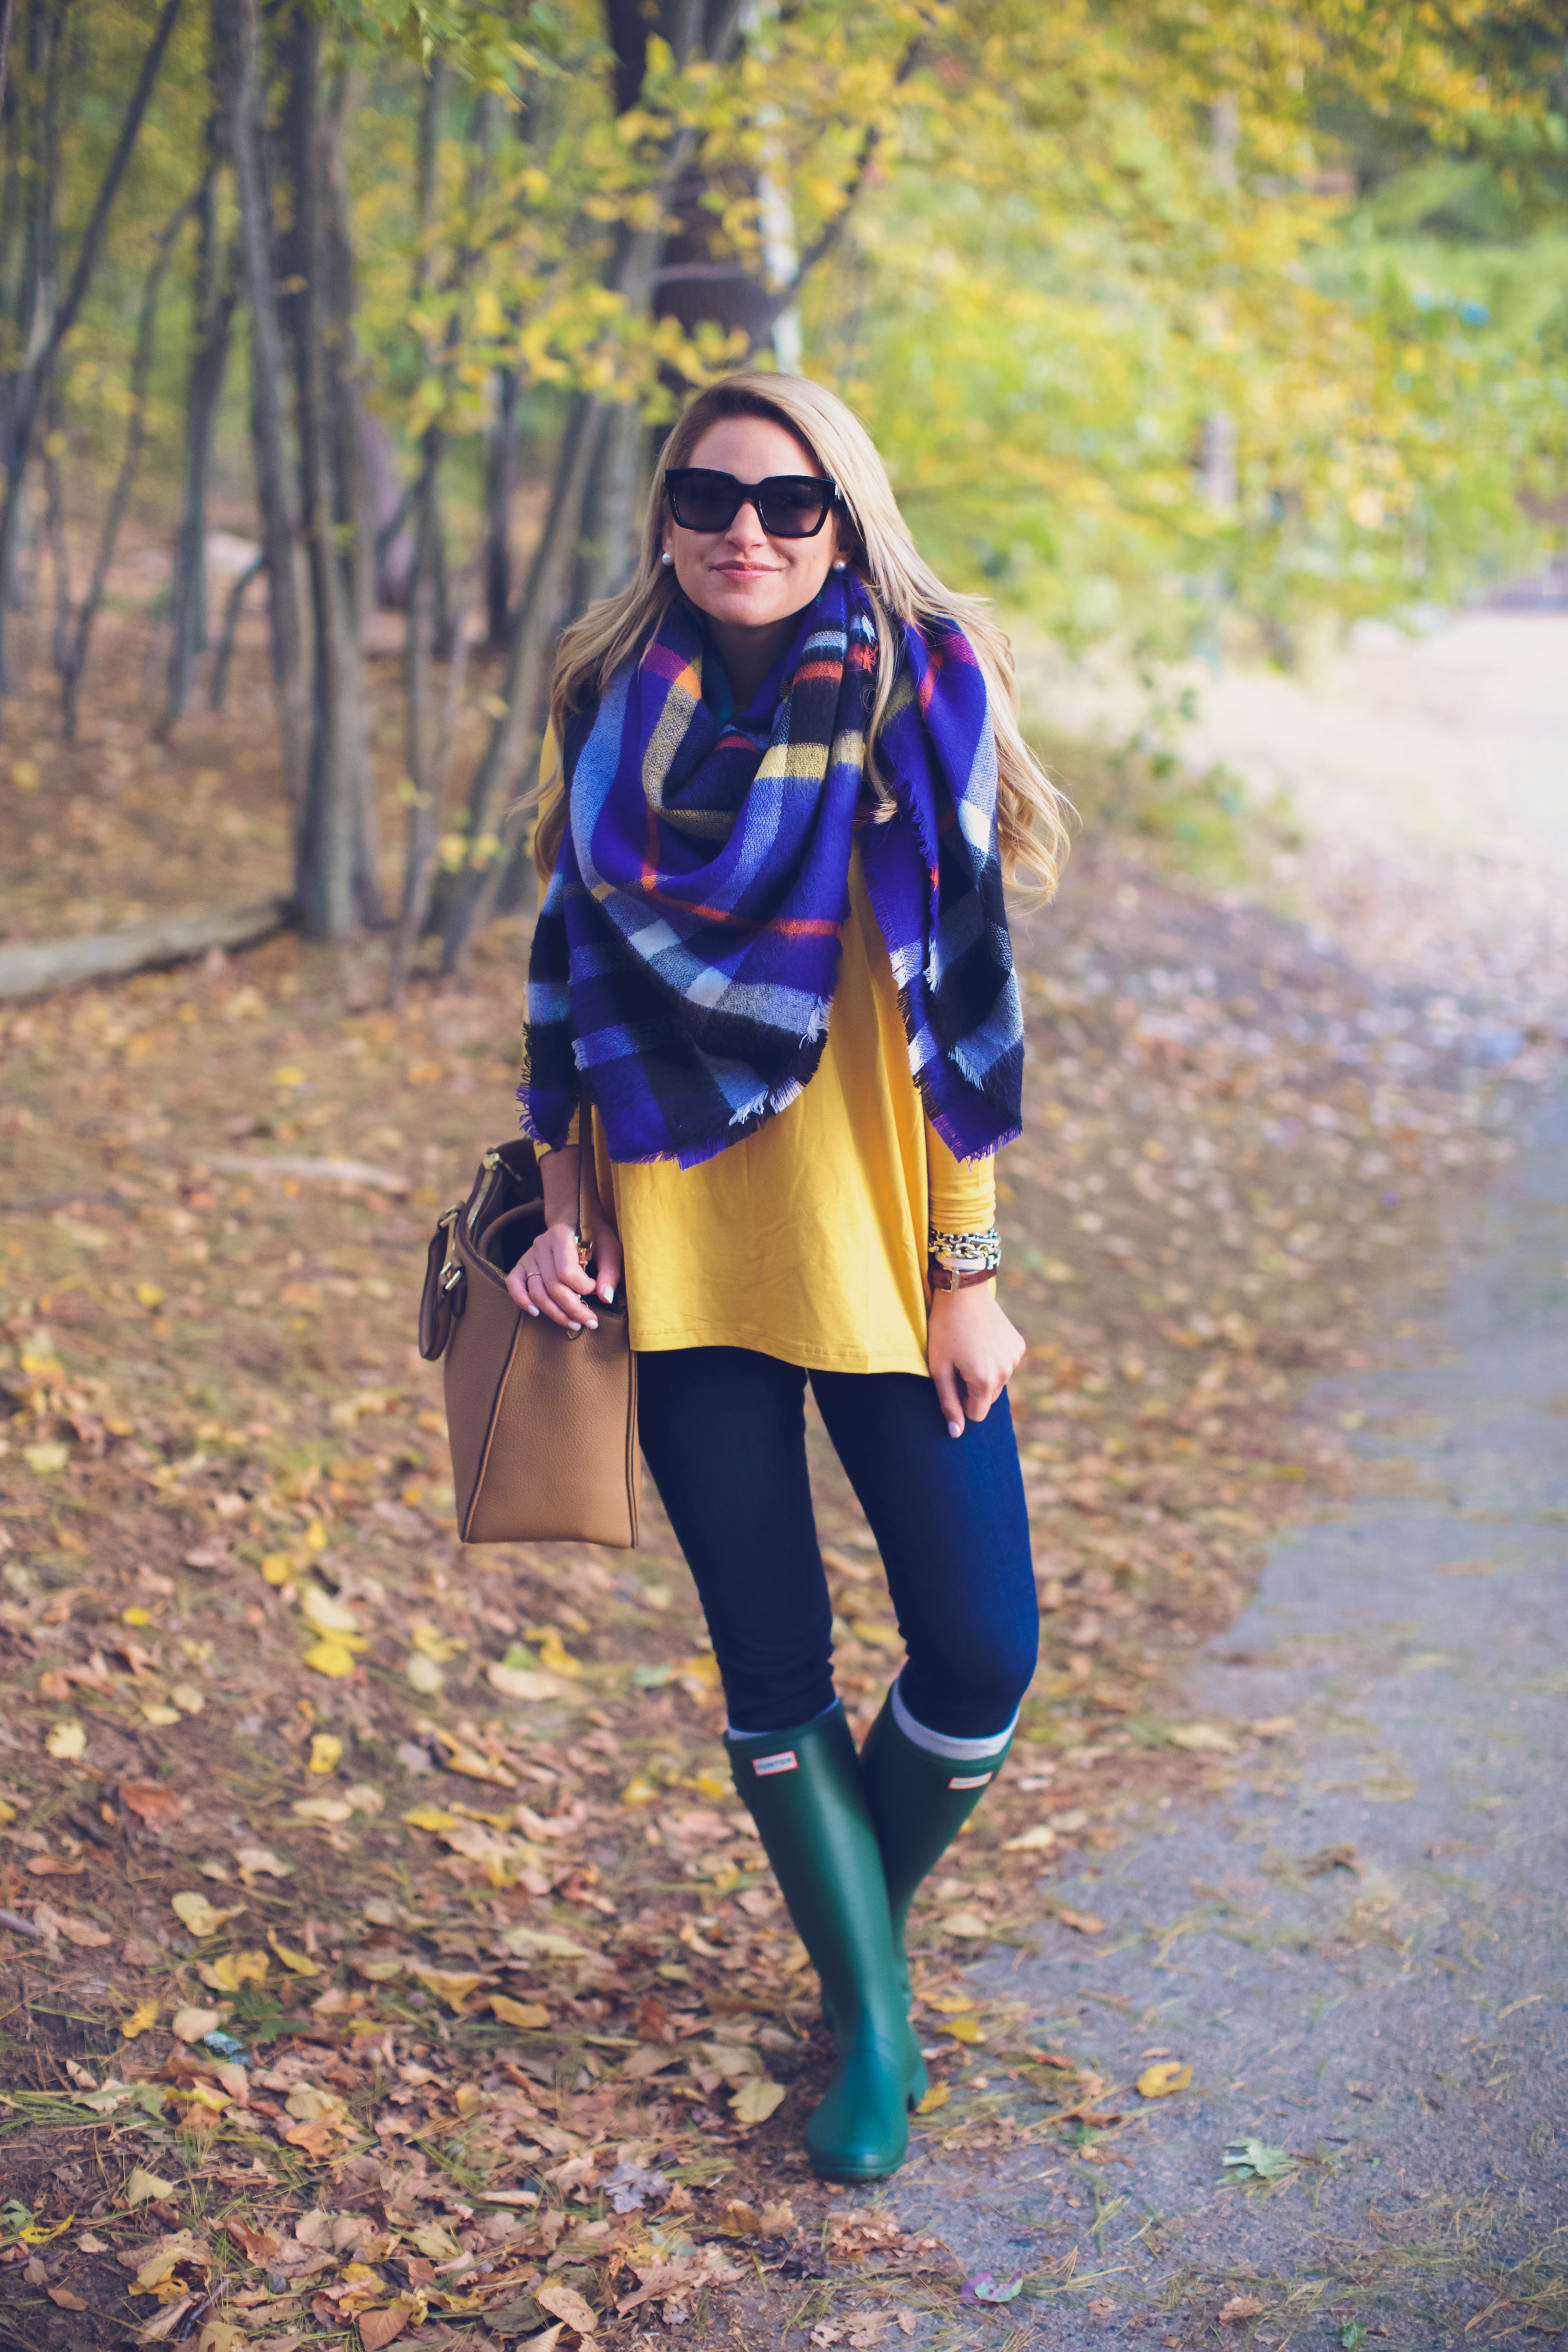 Sweater Dress and Blanket Scarf and Hunter Boots